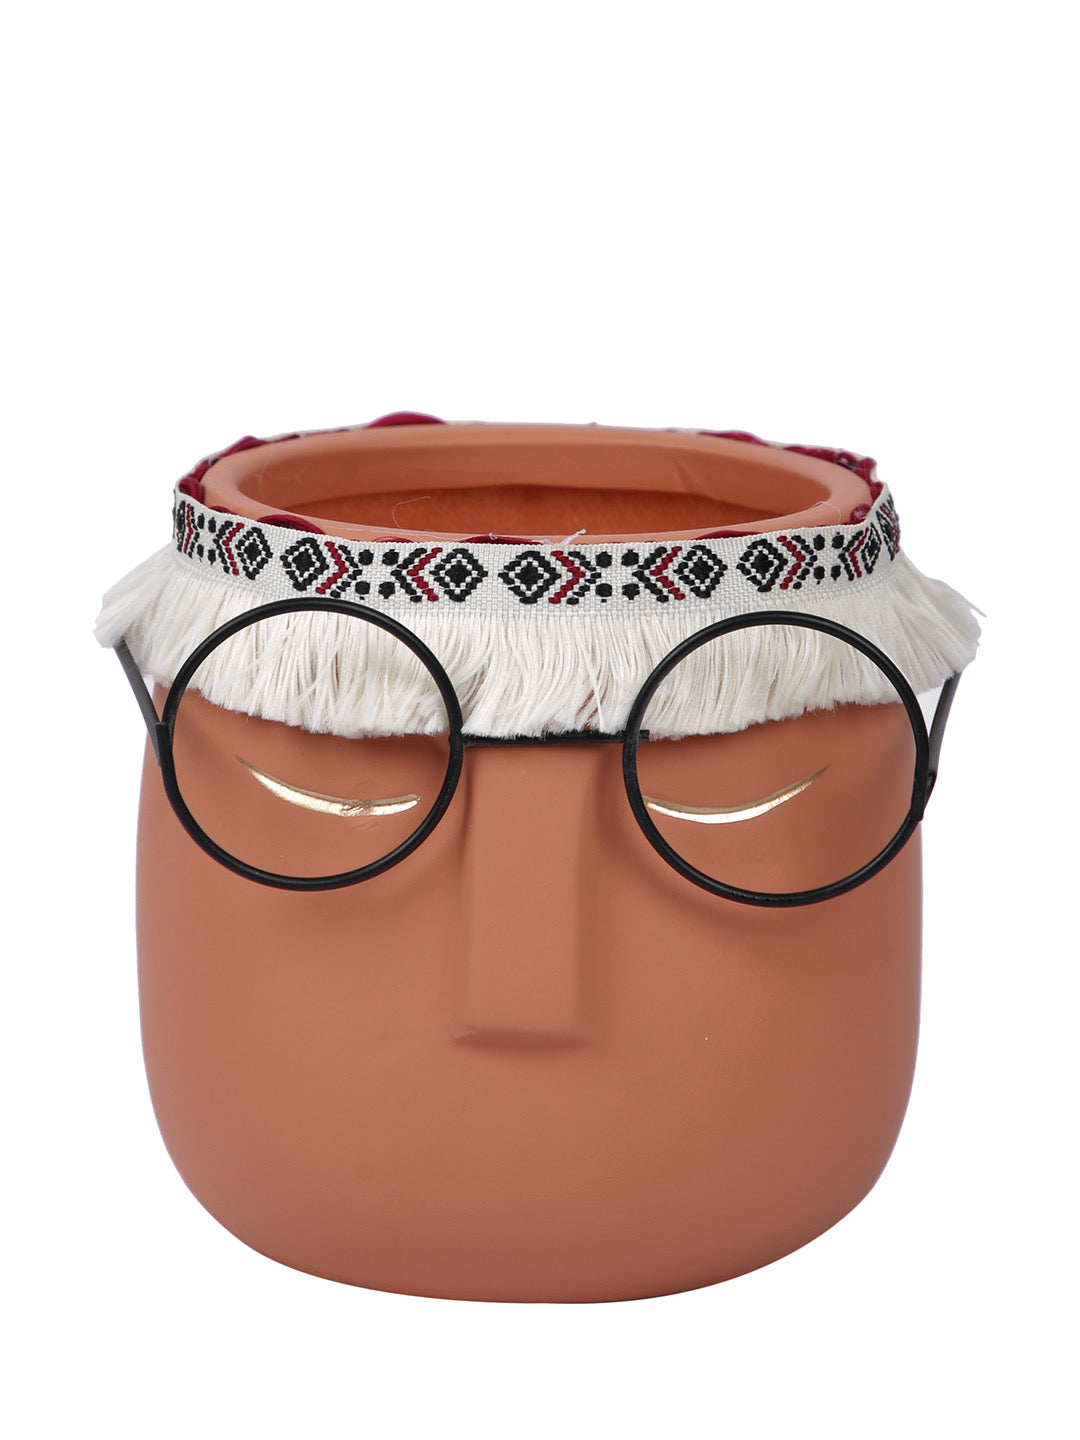 Human Face with Specs Ceramic Planter - Small - Default Title (CHC22516PI)